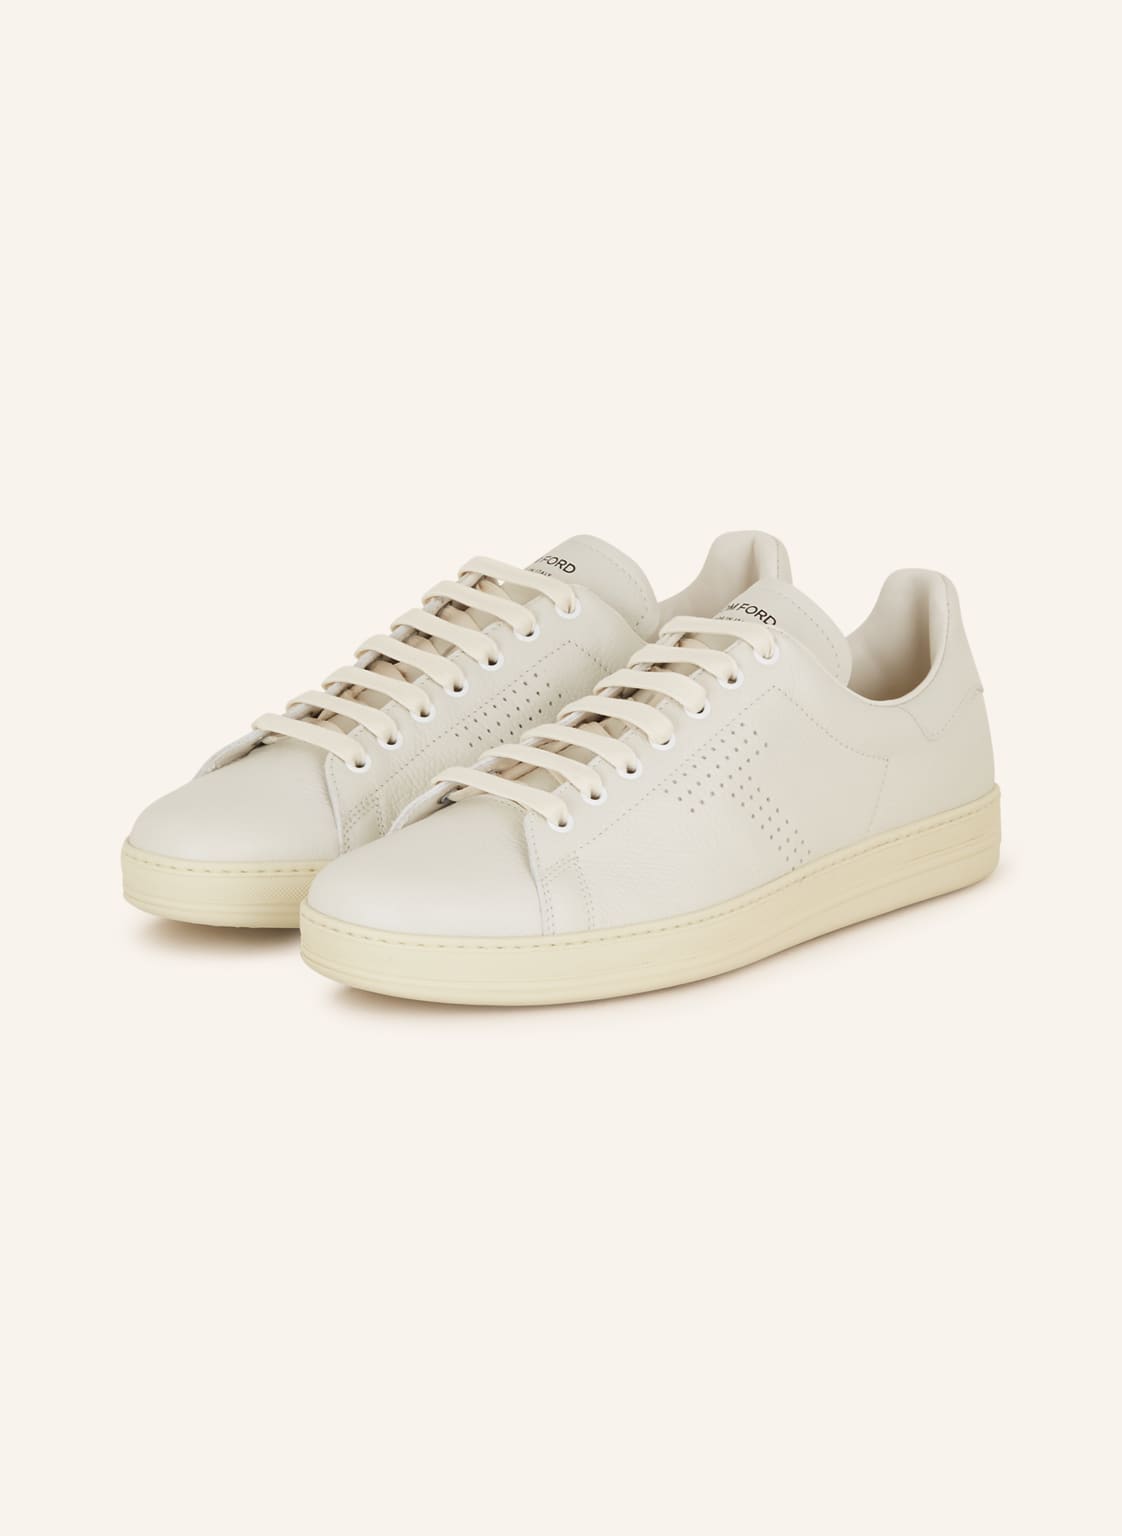 Tom Ford Sneaker weiss von Tom Ford